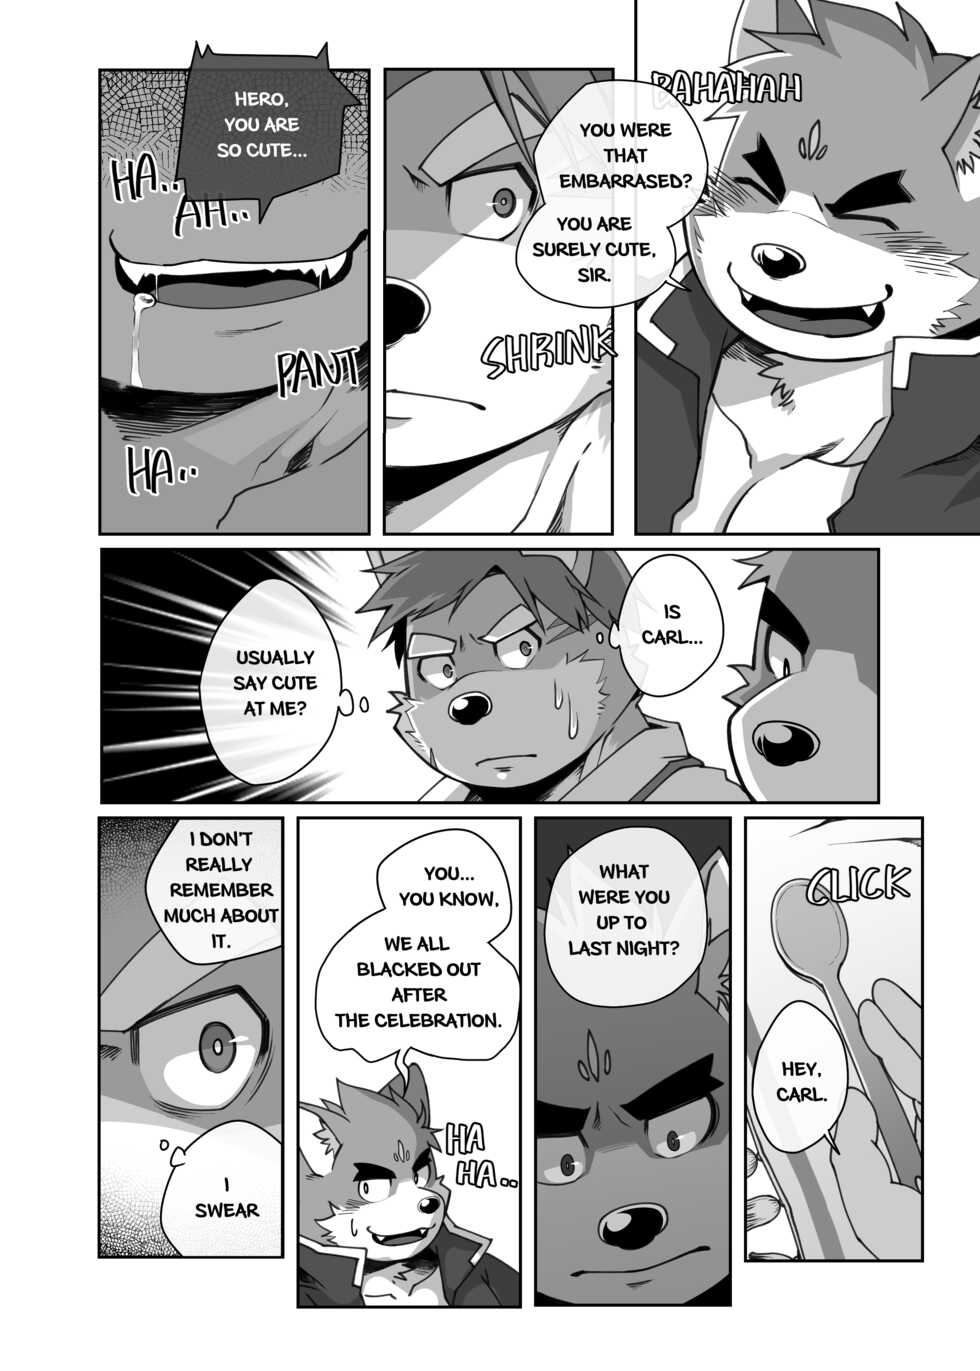 [MIKKY] Hero's Deepest Secret EP1 [English] [Decensored] - Page 9